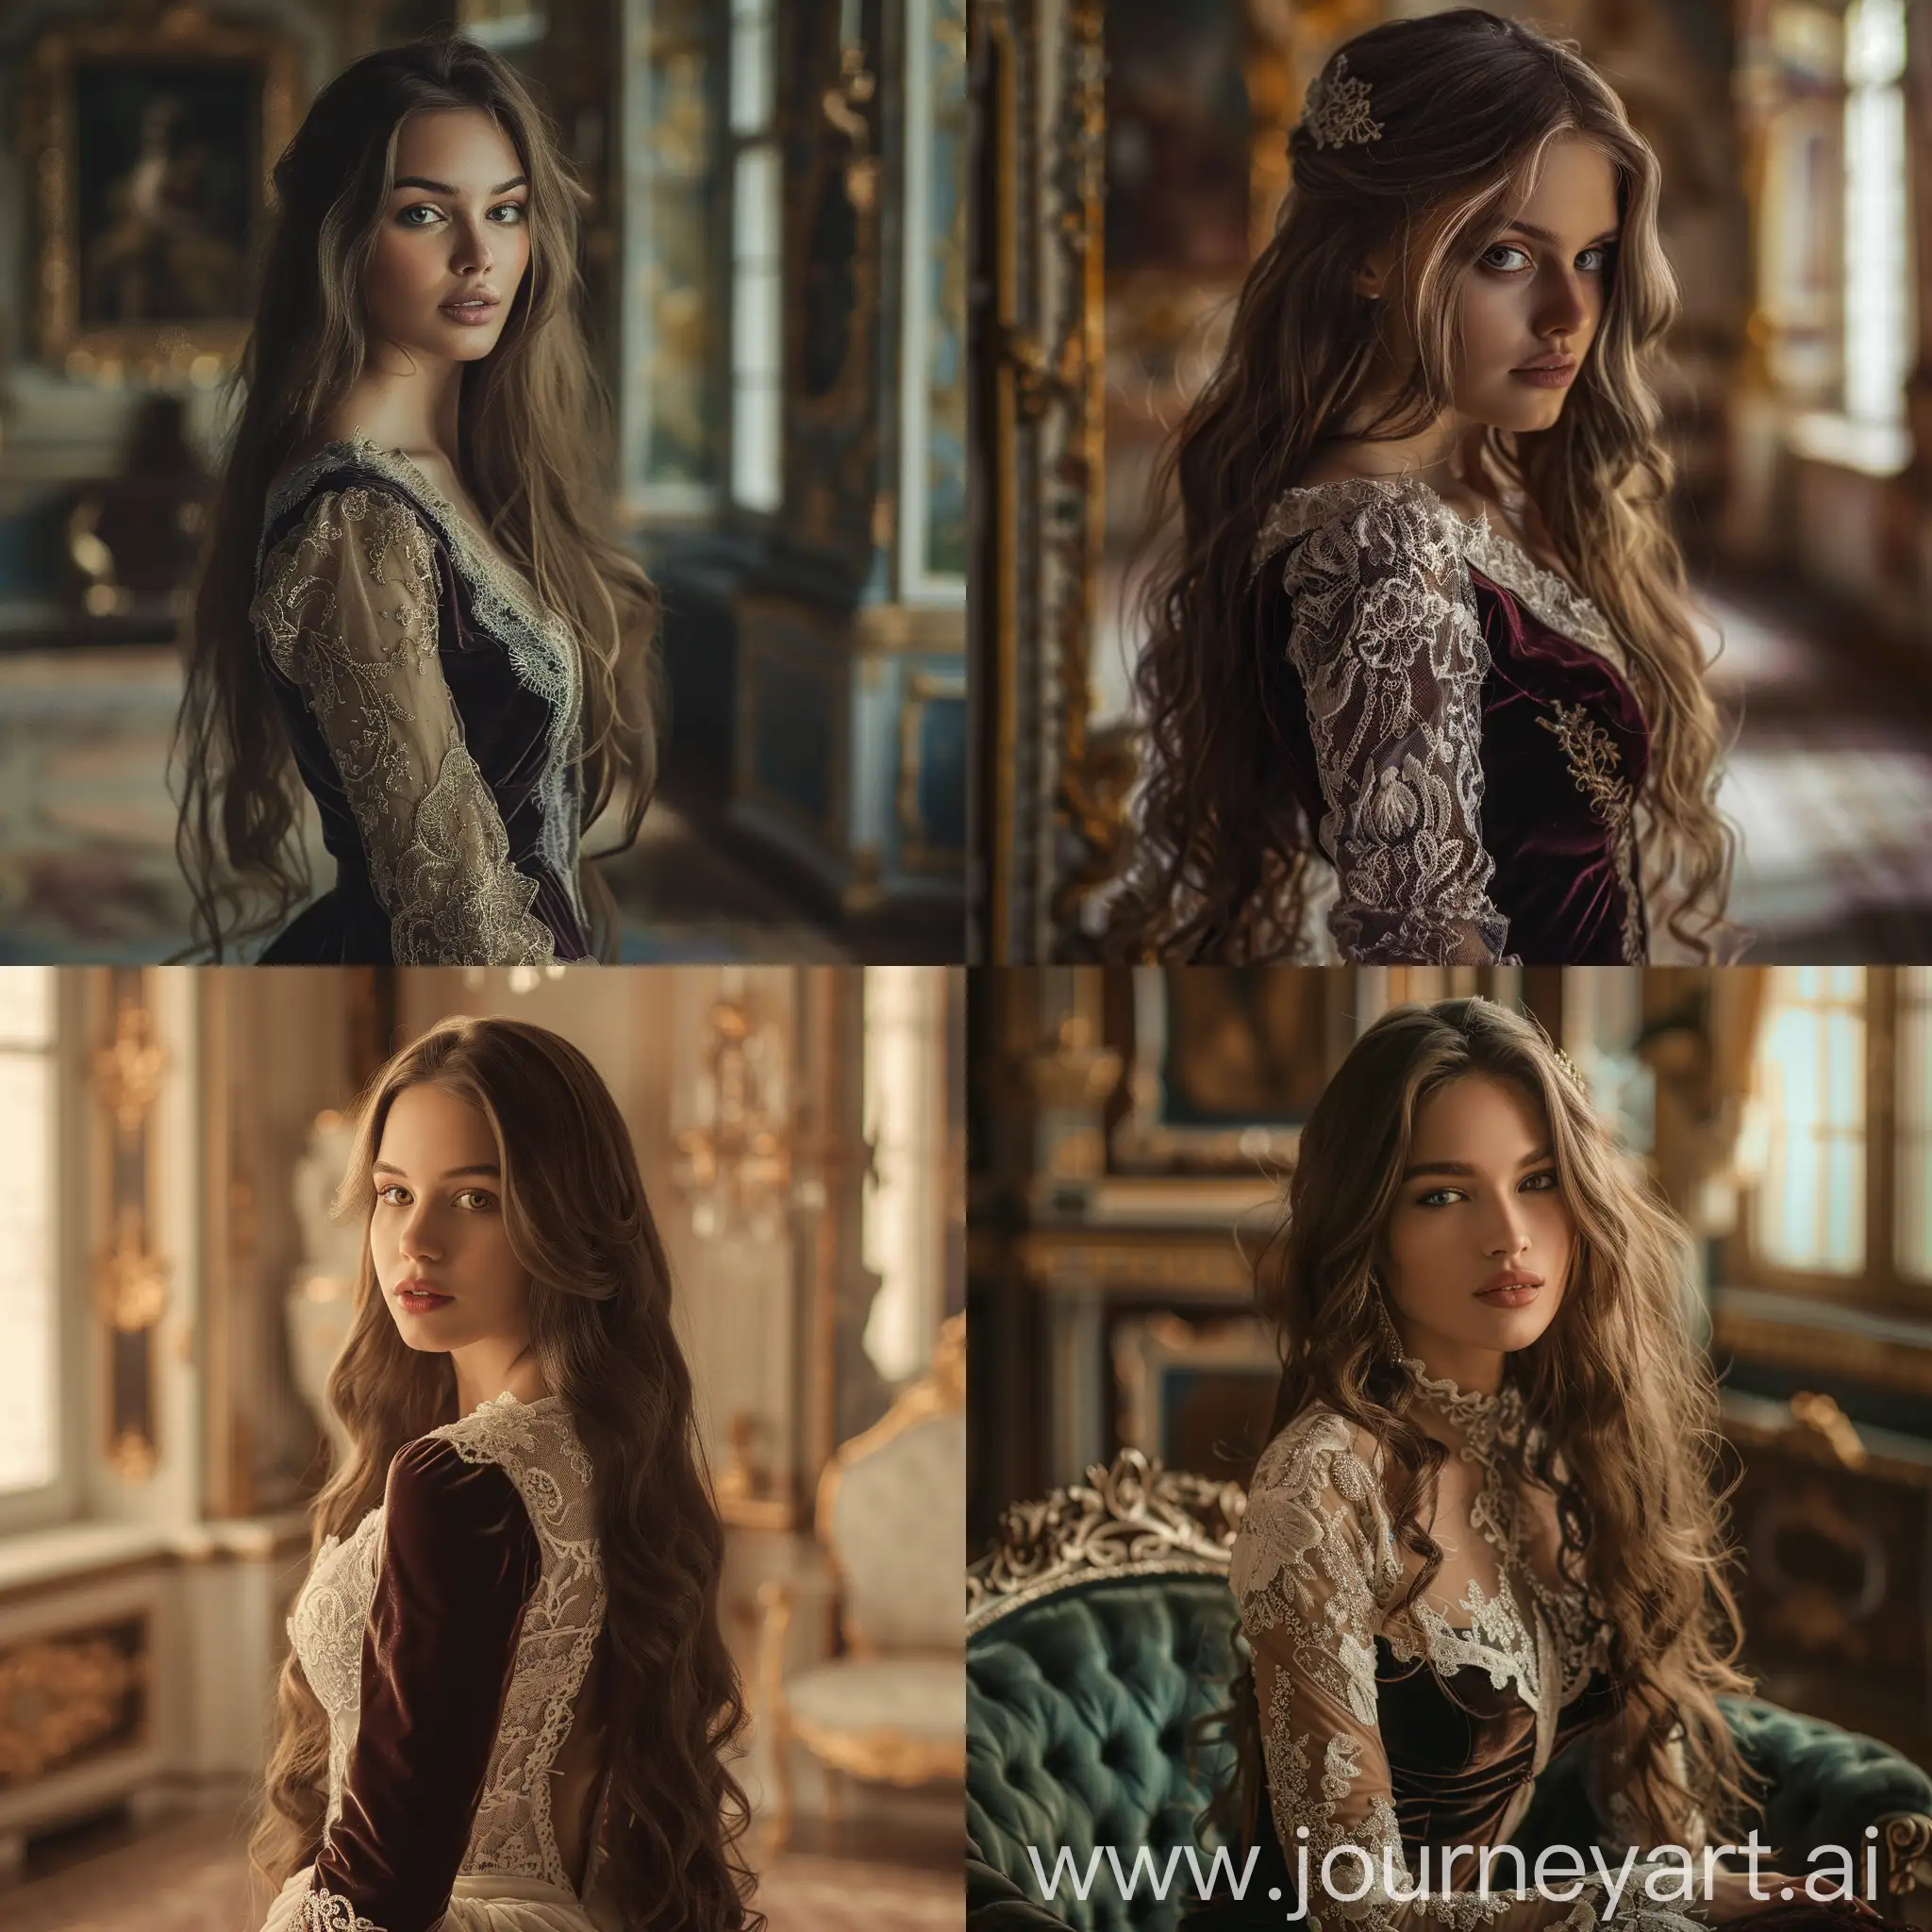 Confident-Fantasy-Woman-in-Lace-and-Velvet-Dress-Enchanting-Palace-Elegance